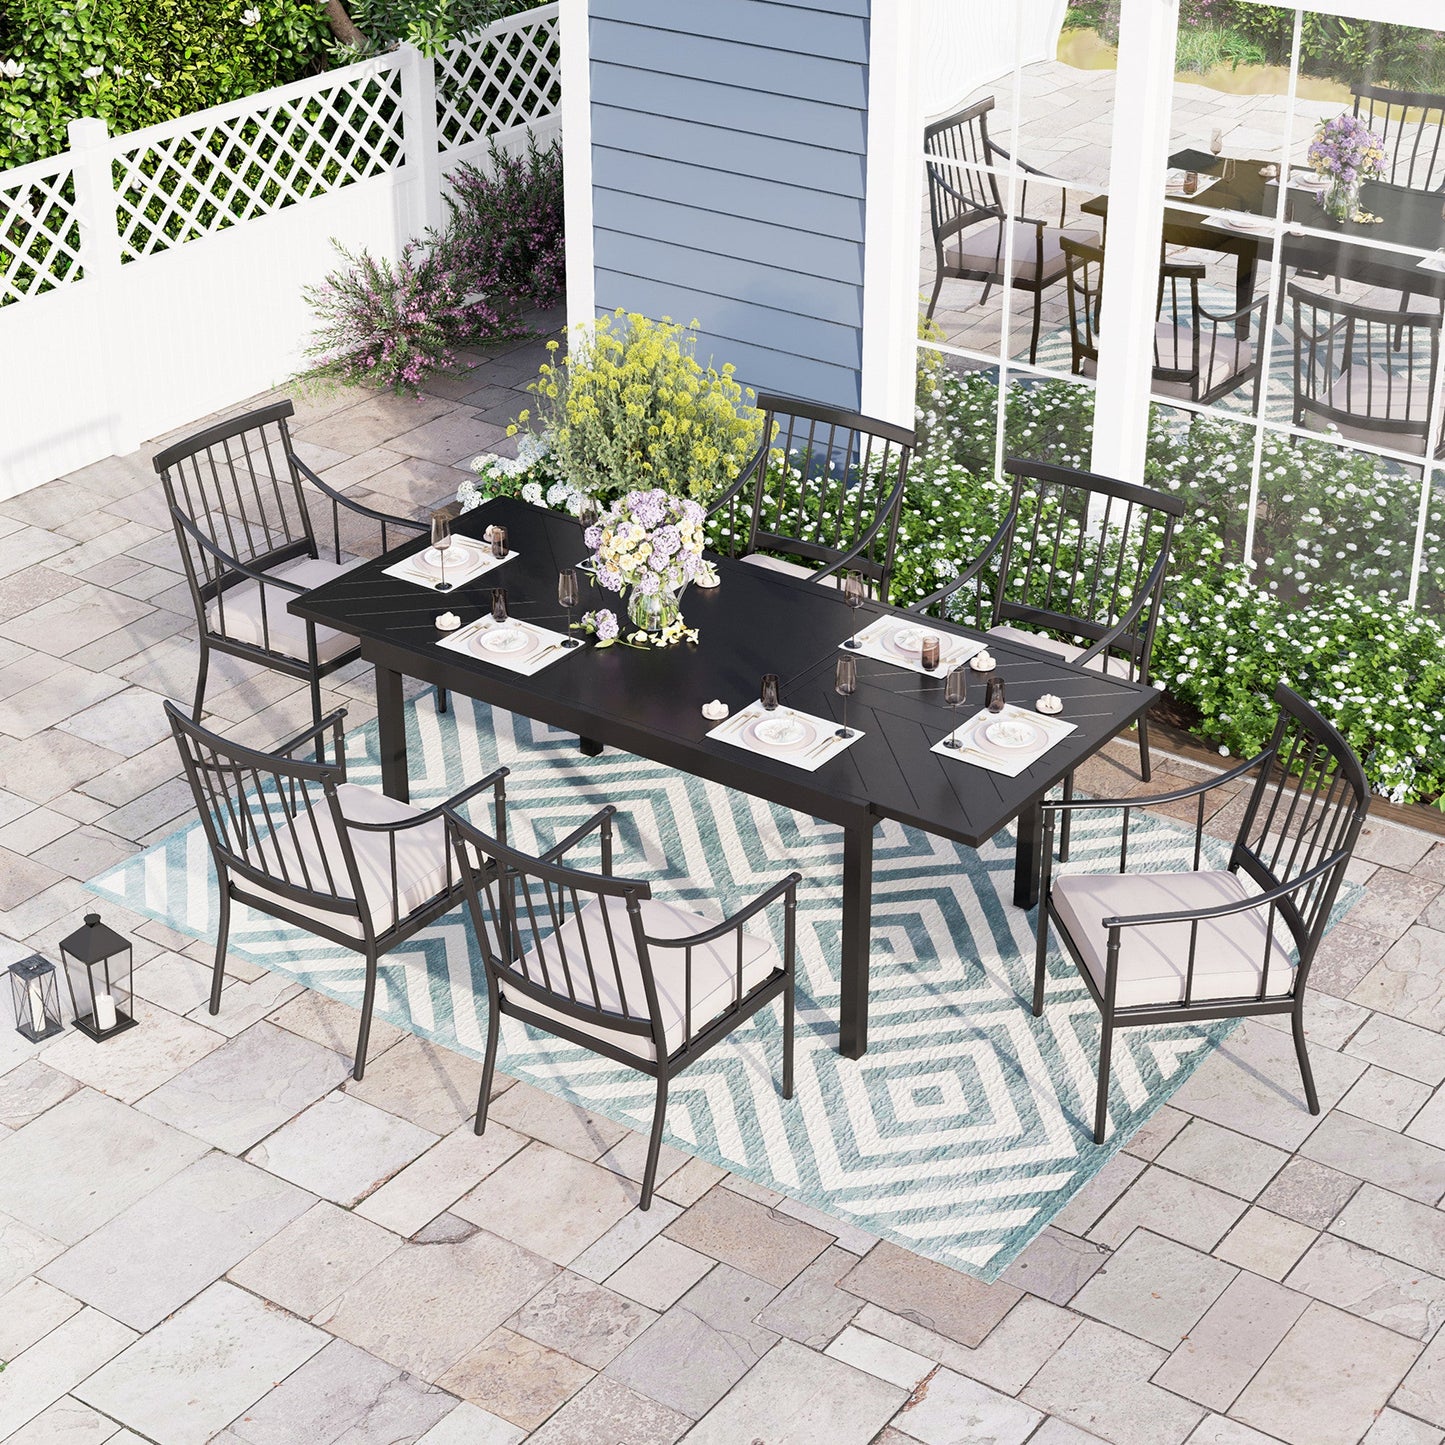 Sophia & William 7-Piece Patio Dining Set with Stylish Chairs and Extendable Table